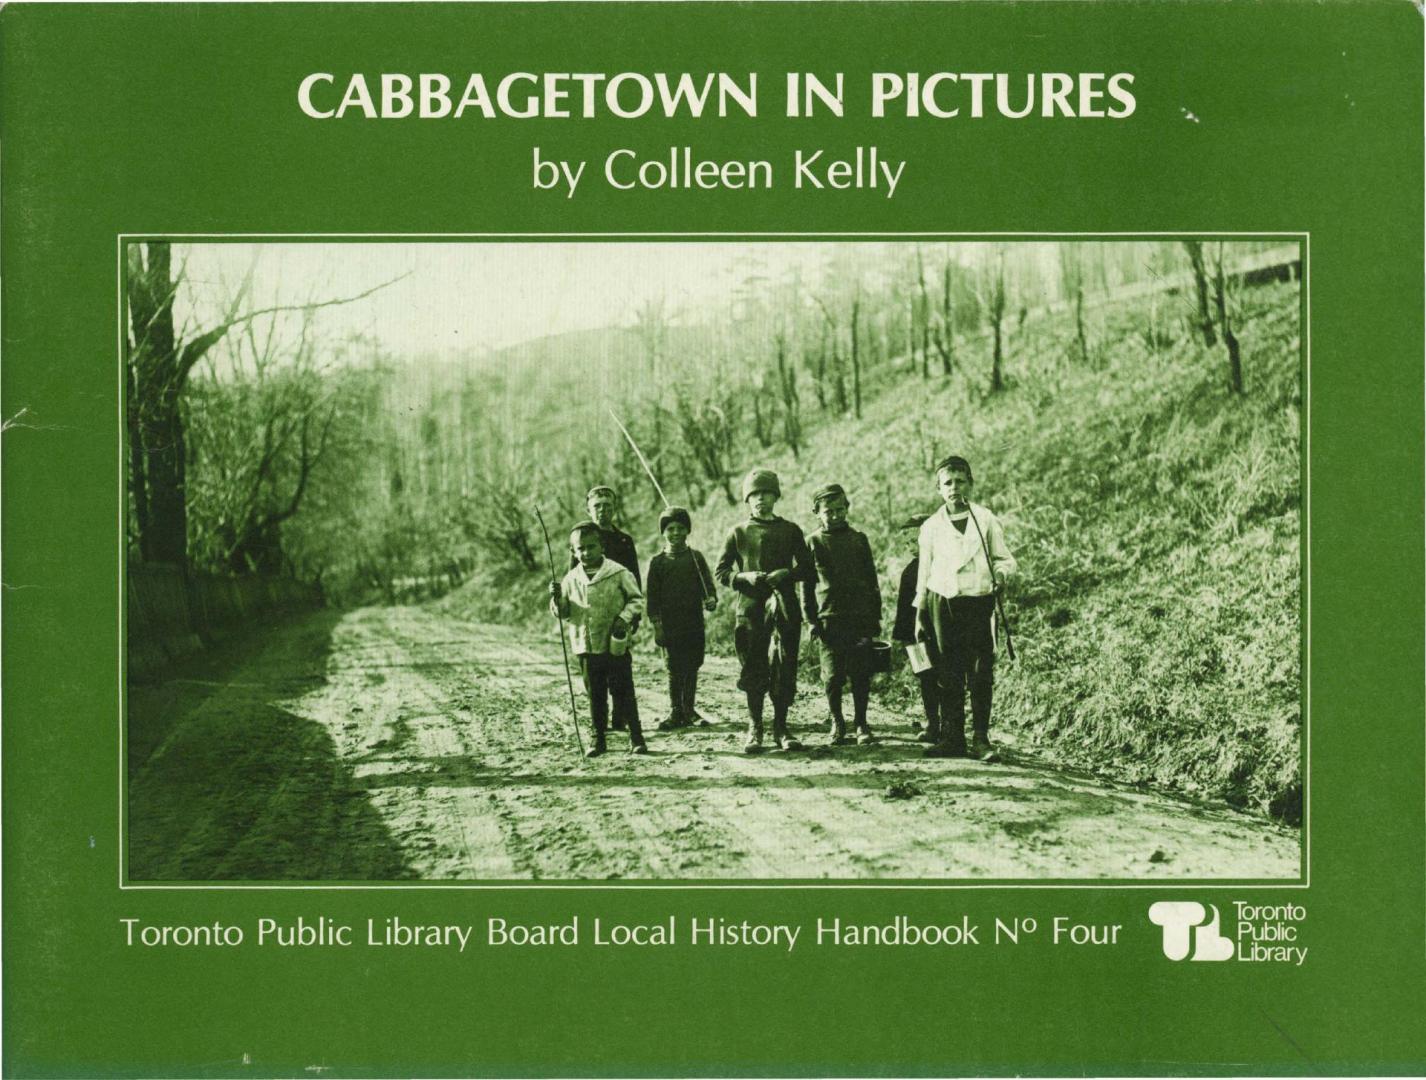 Cabbagetown in pictures